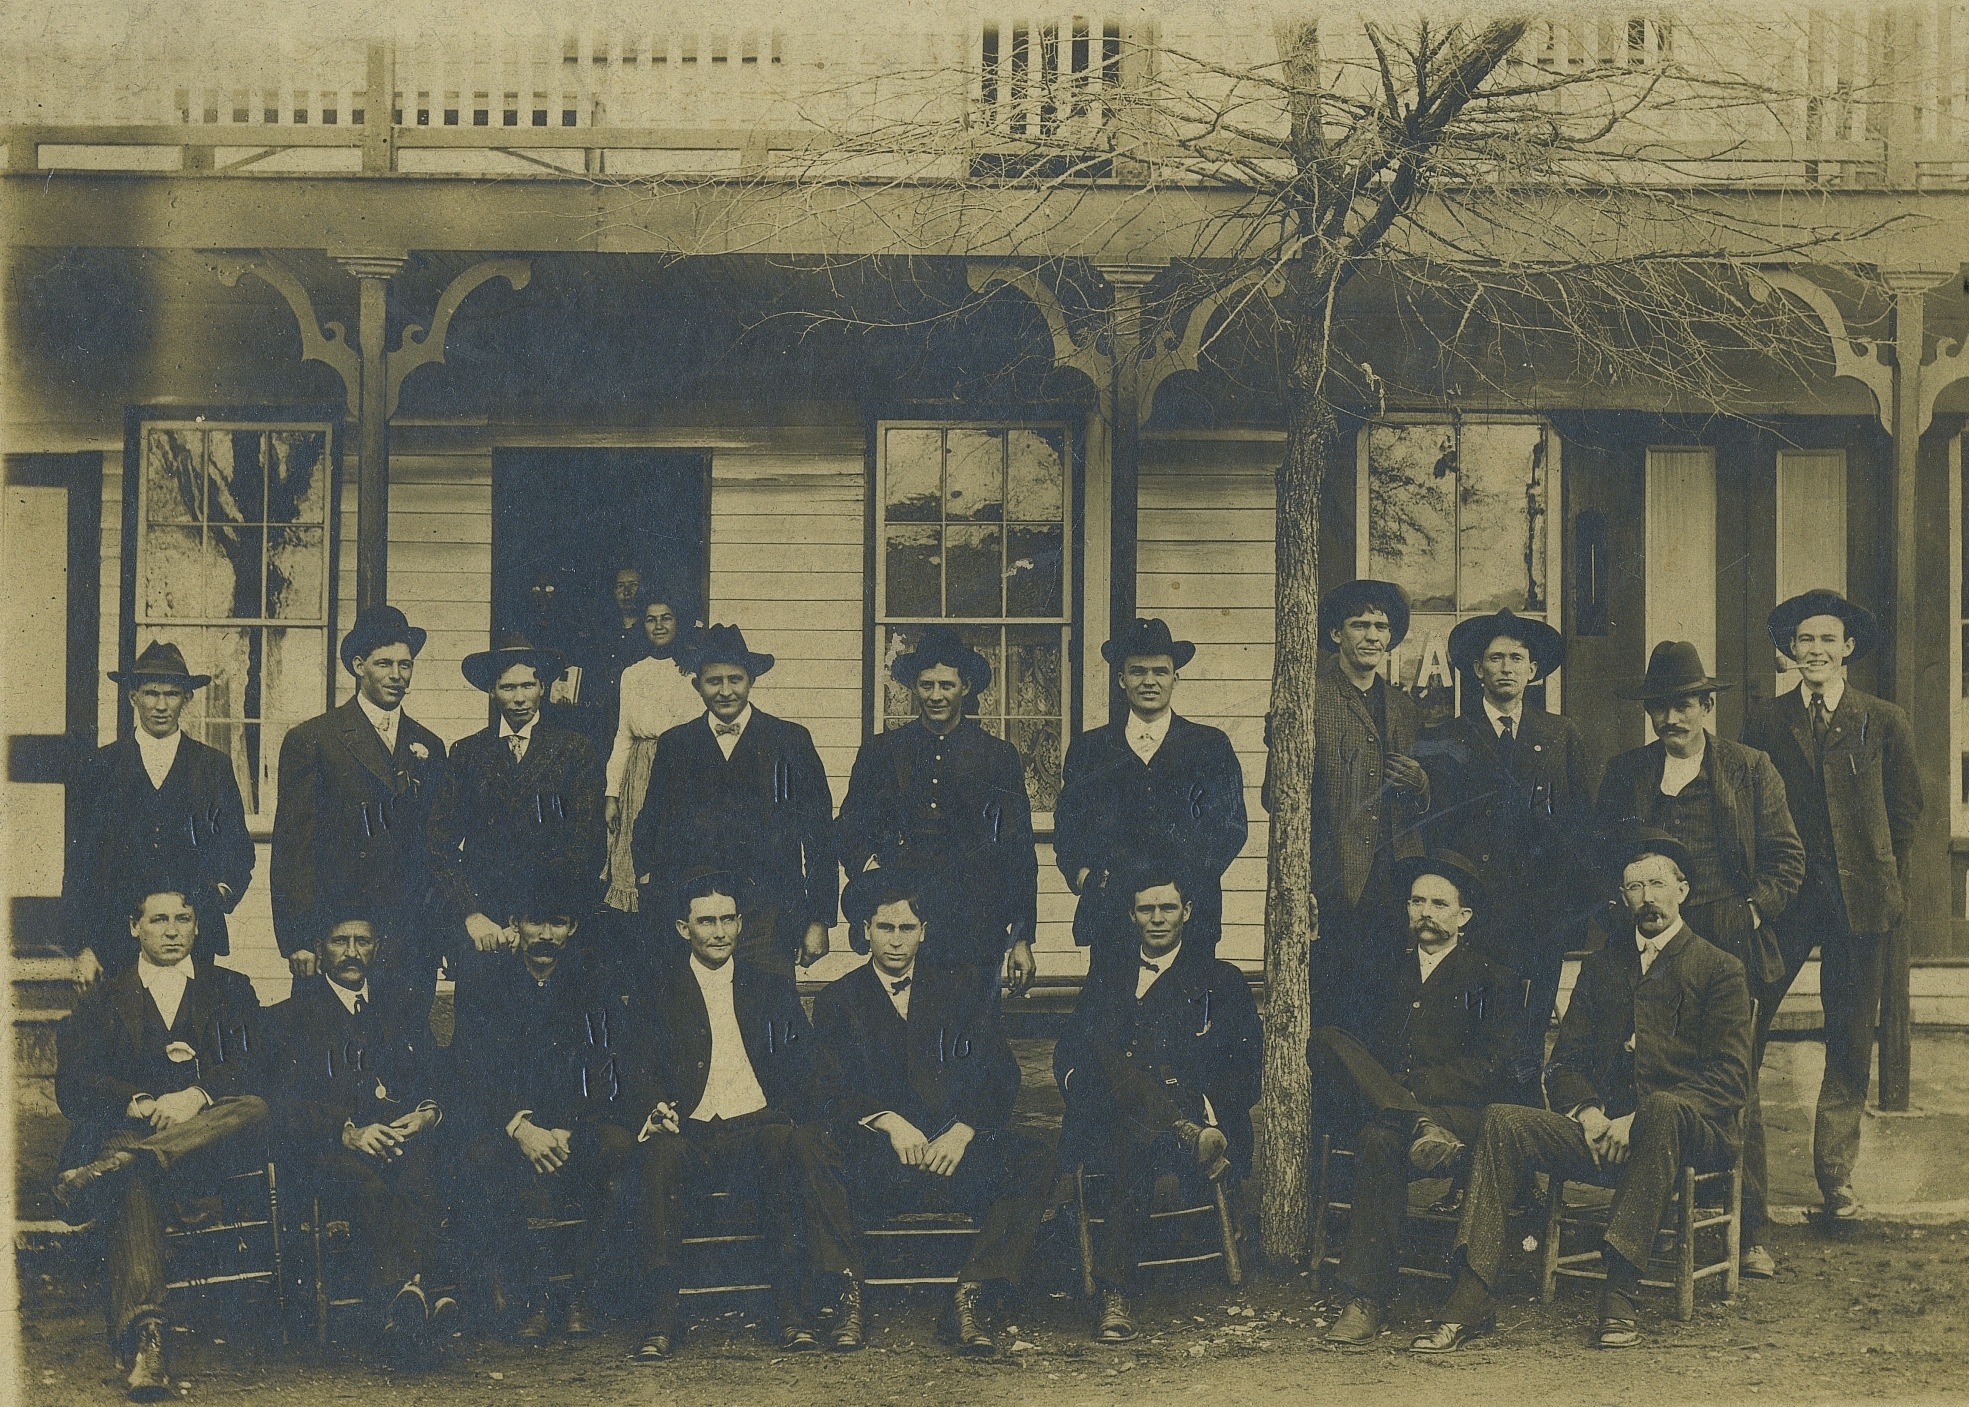 Tate House Boarders, Tennessee 1880's